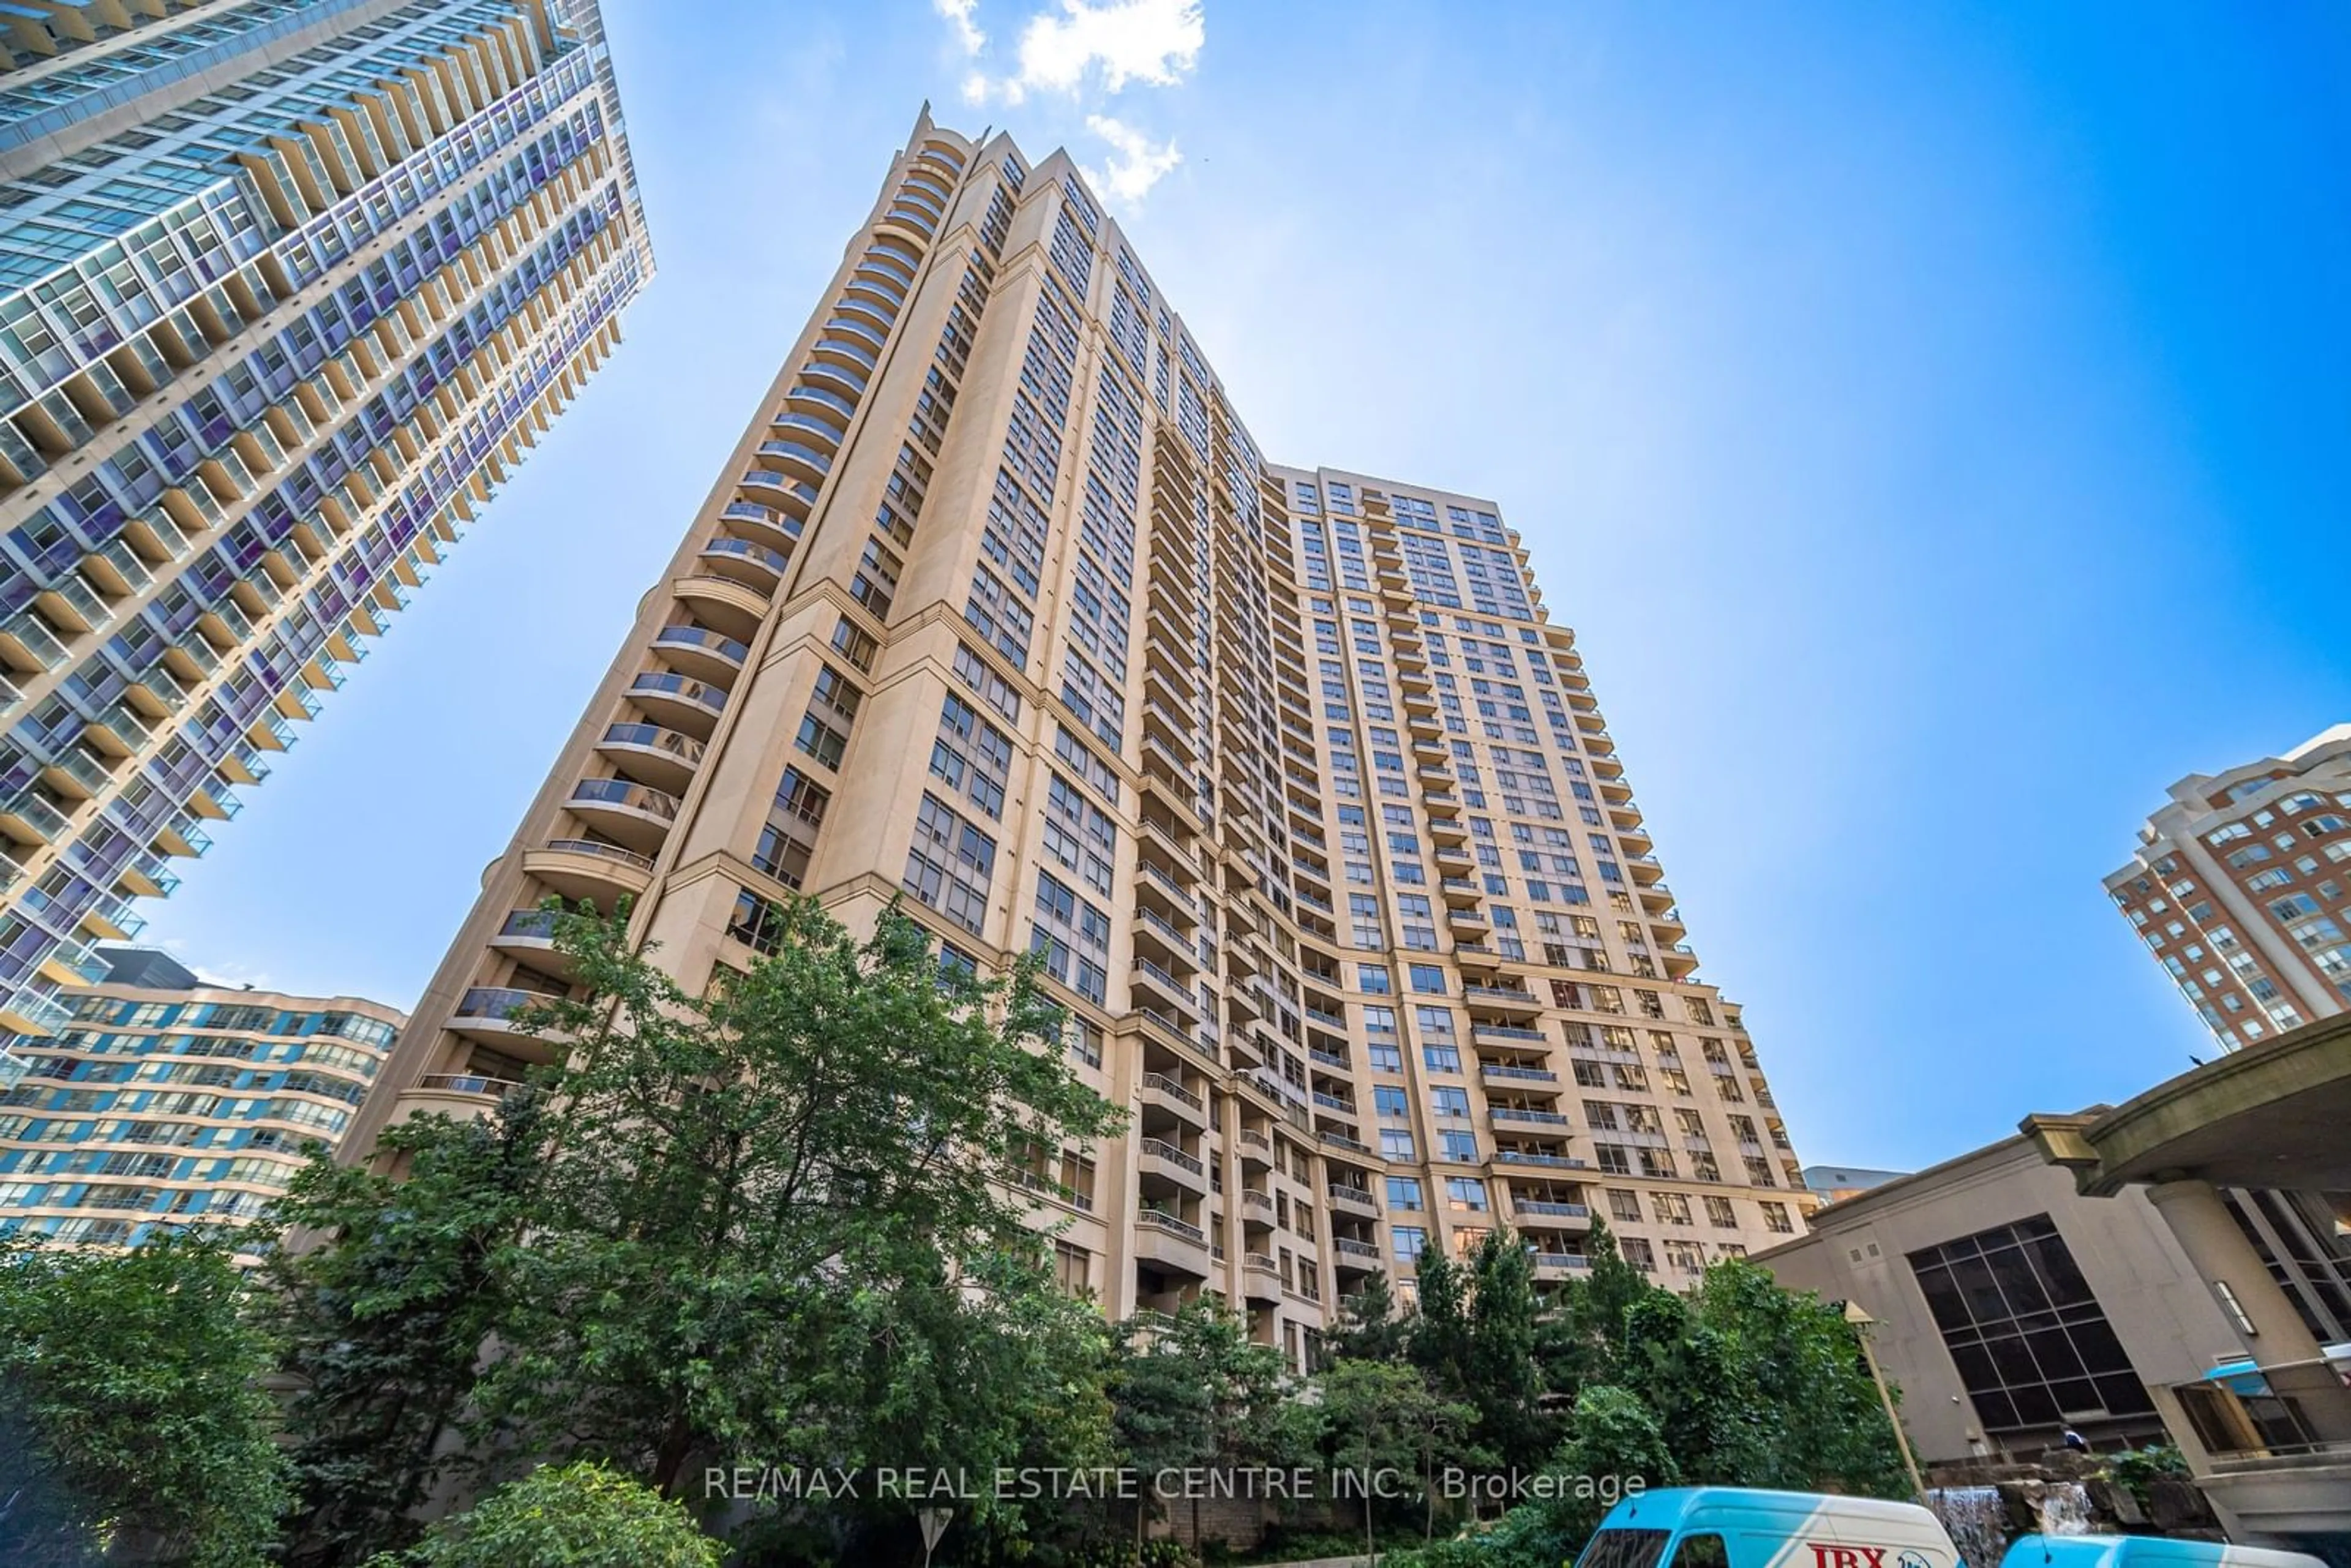 A pic from exterior of the house or condo for 3880 Duke Of York Blvd #1610, Mississauga Ontario L5B 4M7